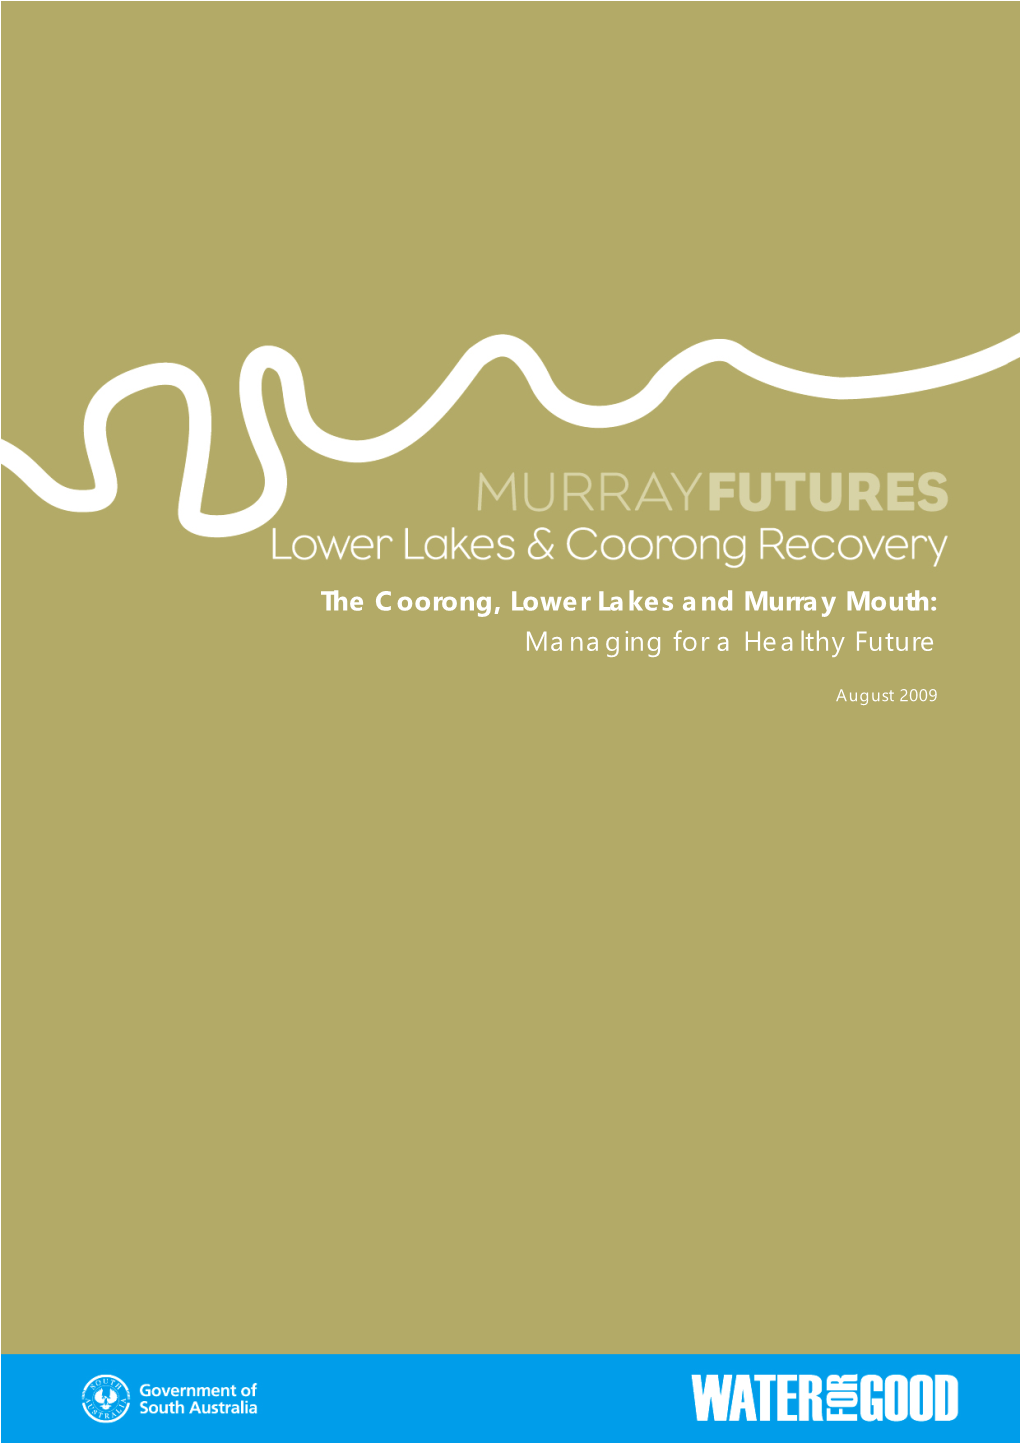 The Coorong, Lower Lakes and Murray Mouth: Managing for a Healthy Future